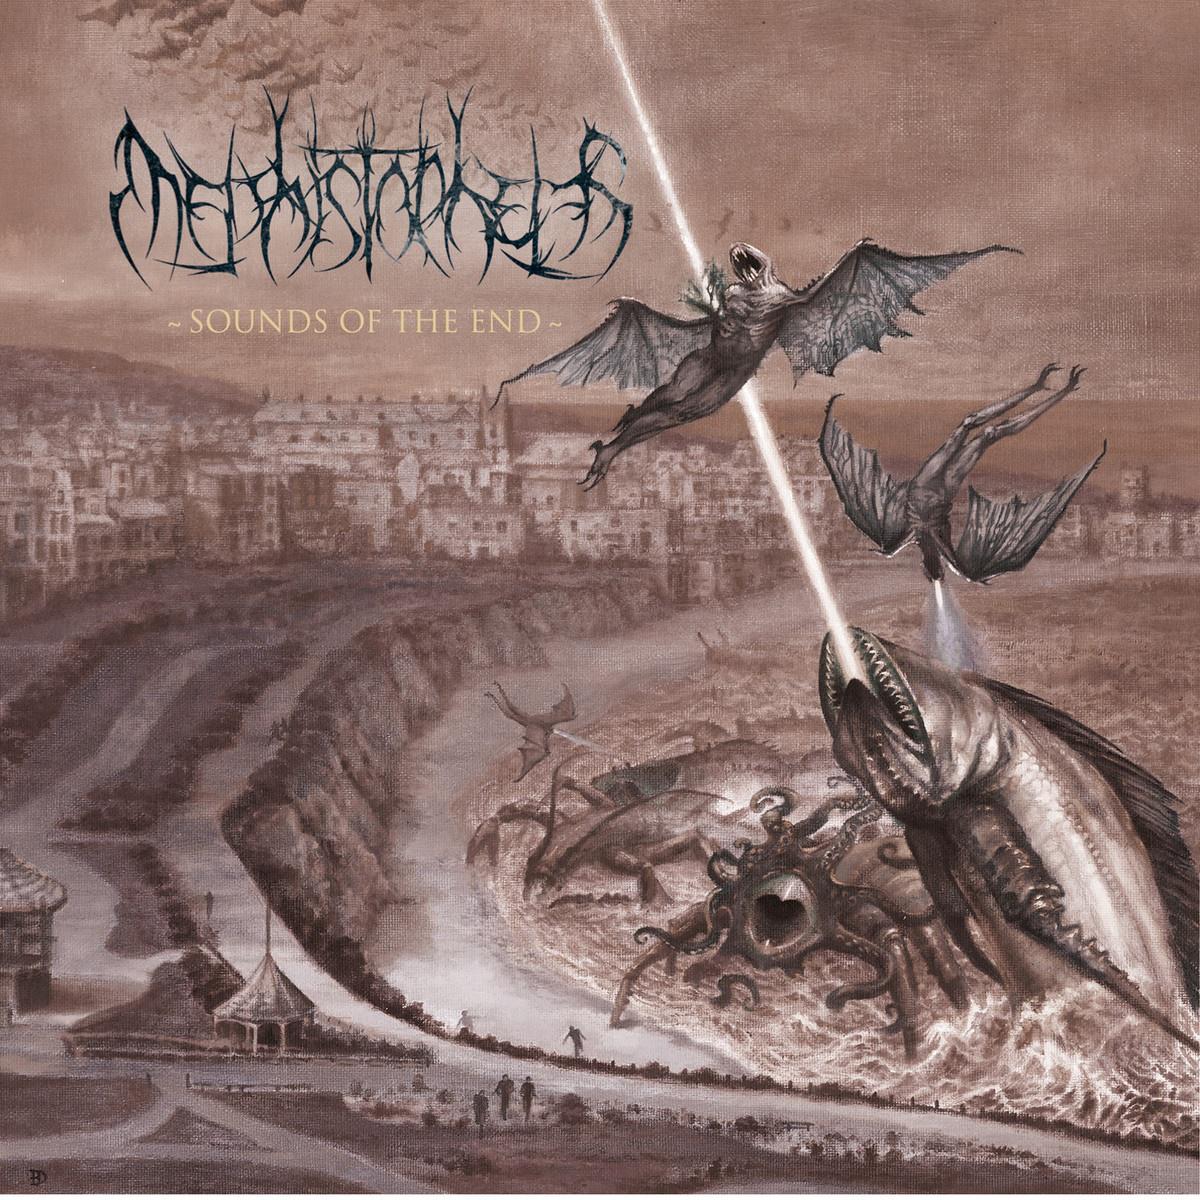 Mephistopheles - The End of All Light